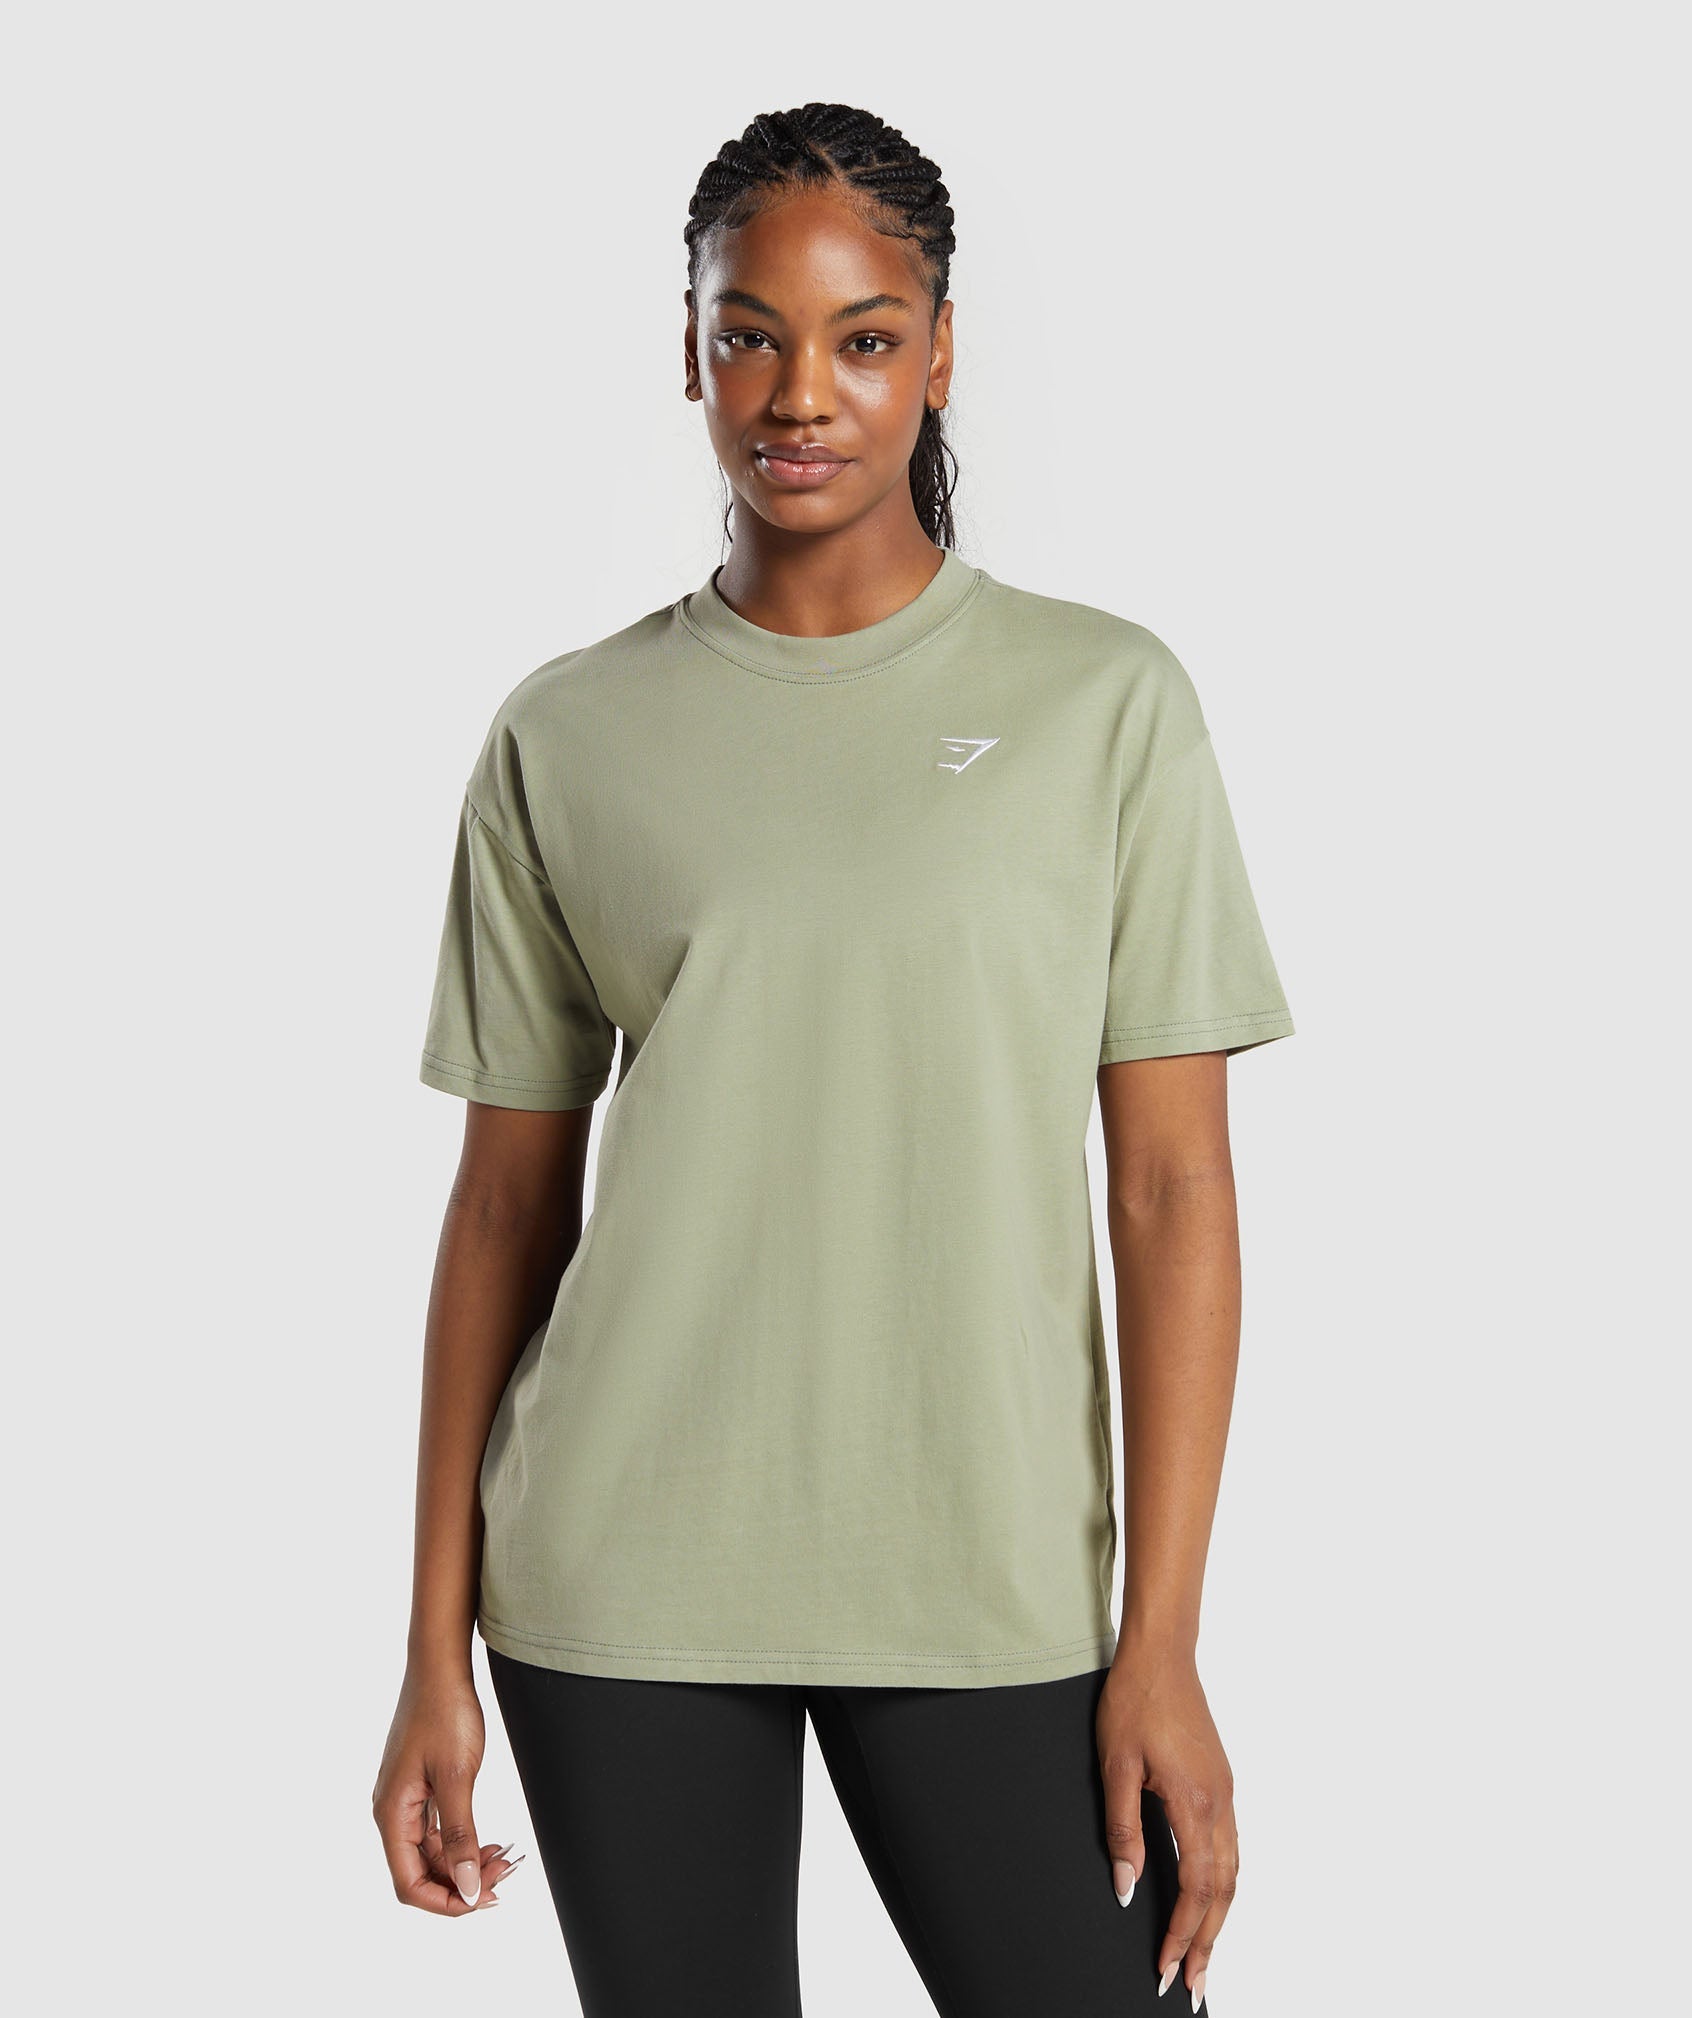 Training Oversized T-Shirt in Chalk Green is out of stock